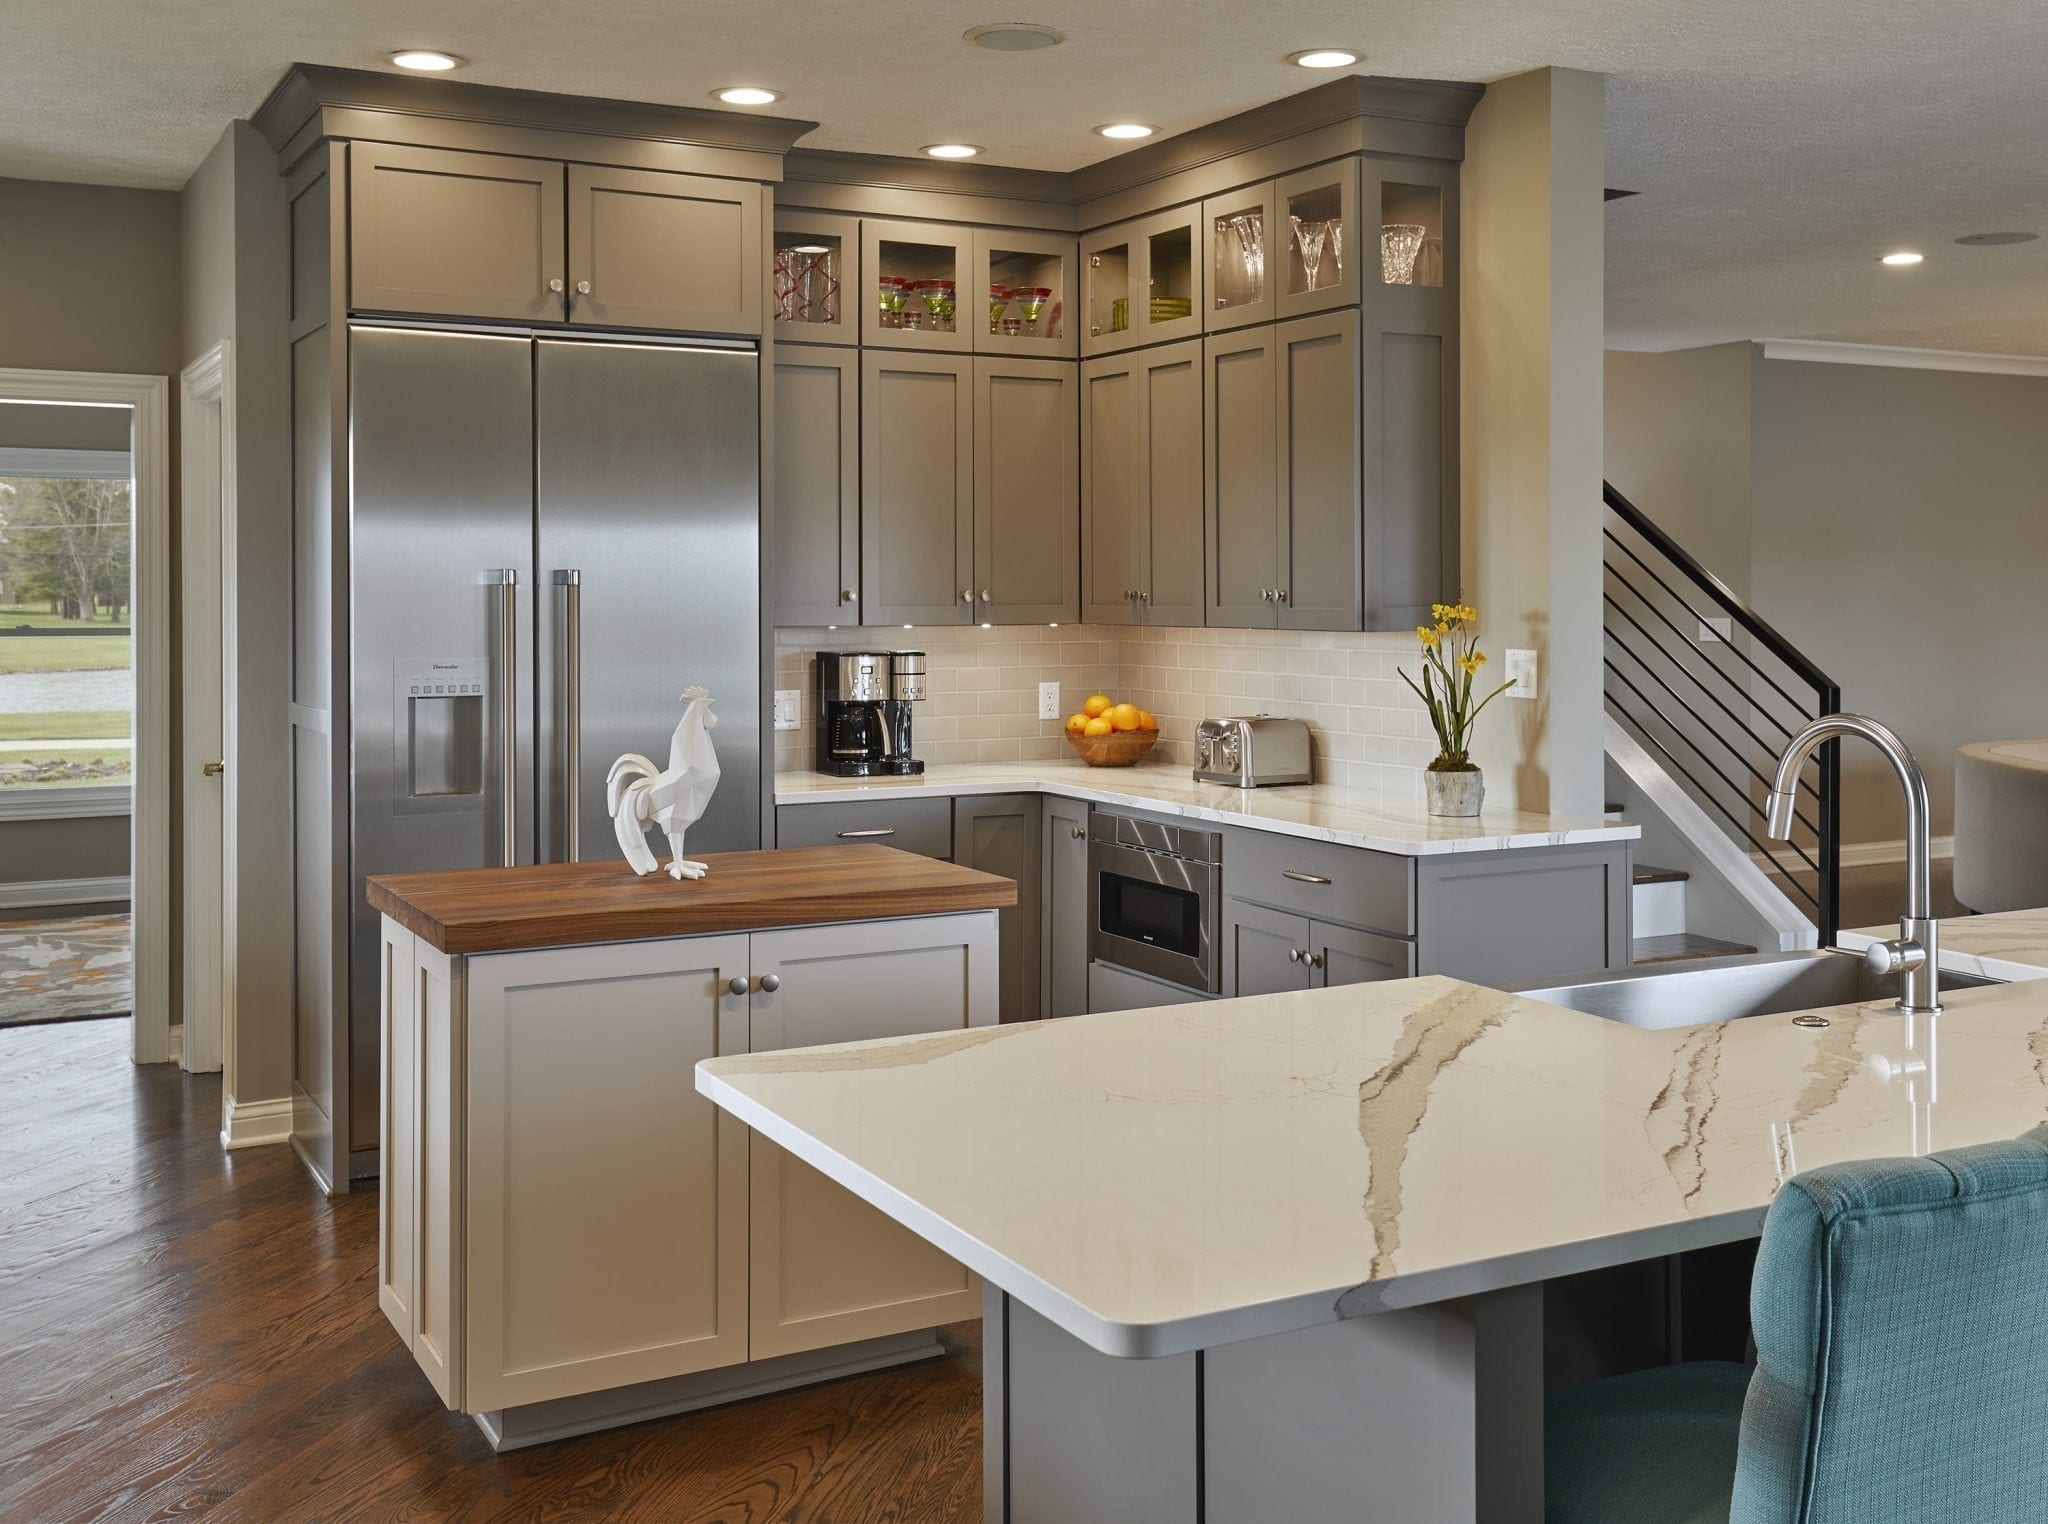 Kitchen with Grey Cabinets and Butcher Block Island